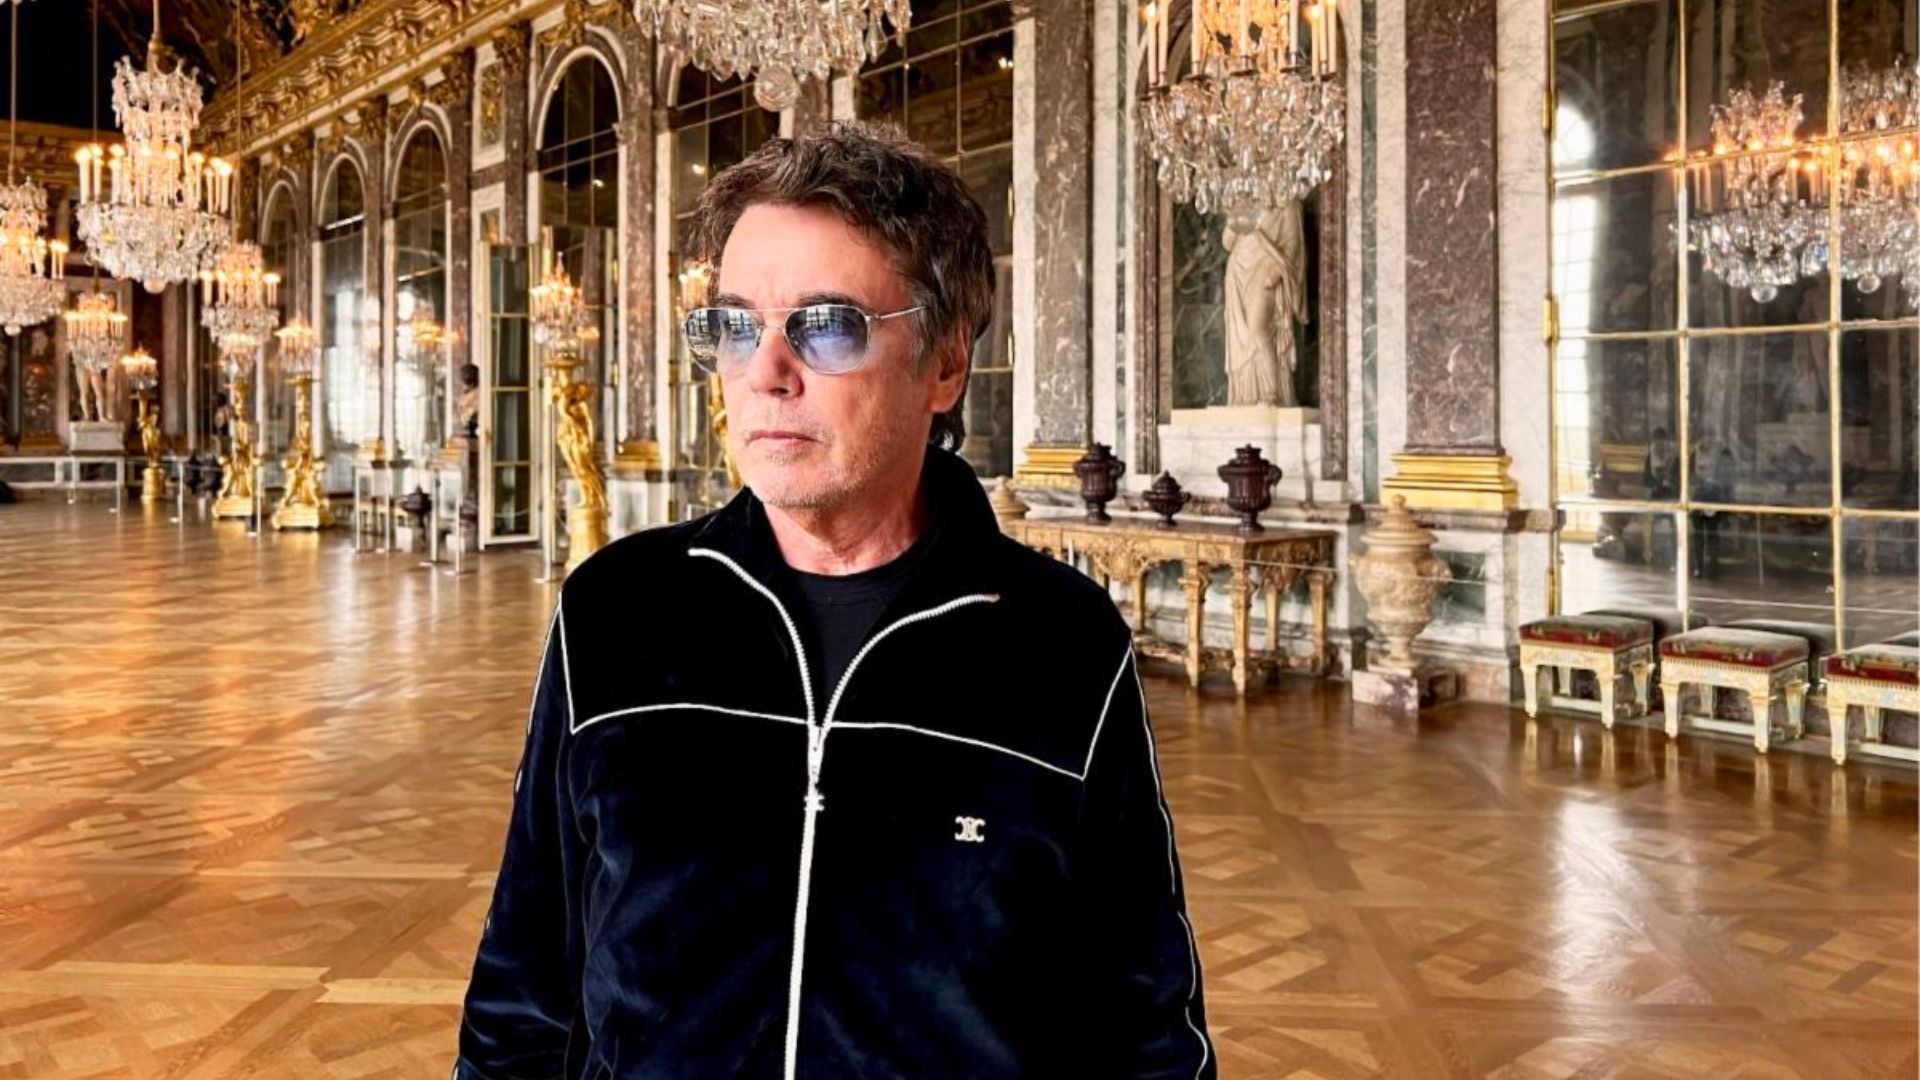 Jean-Michel Jarre to perform a revolutionary mixed-reality concert from Château de Versailles